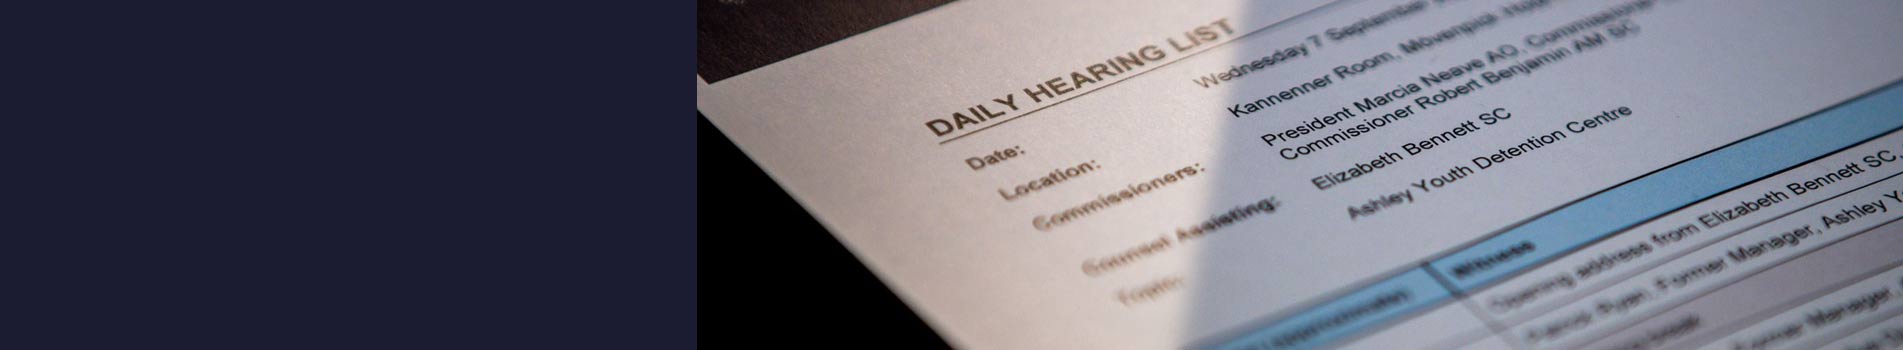 Daily Hearings list papers